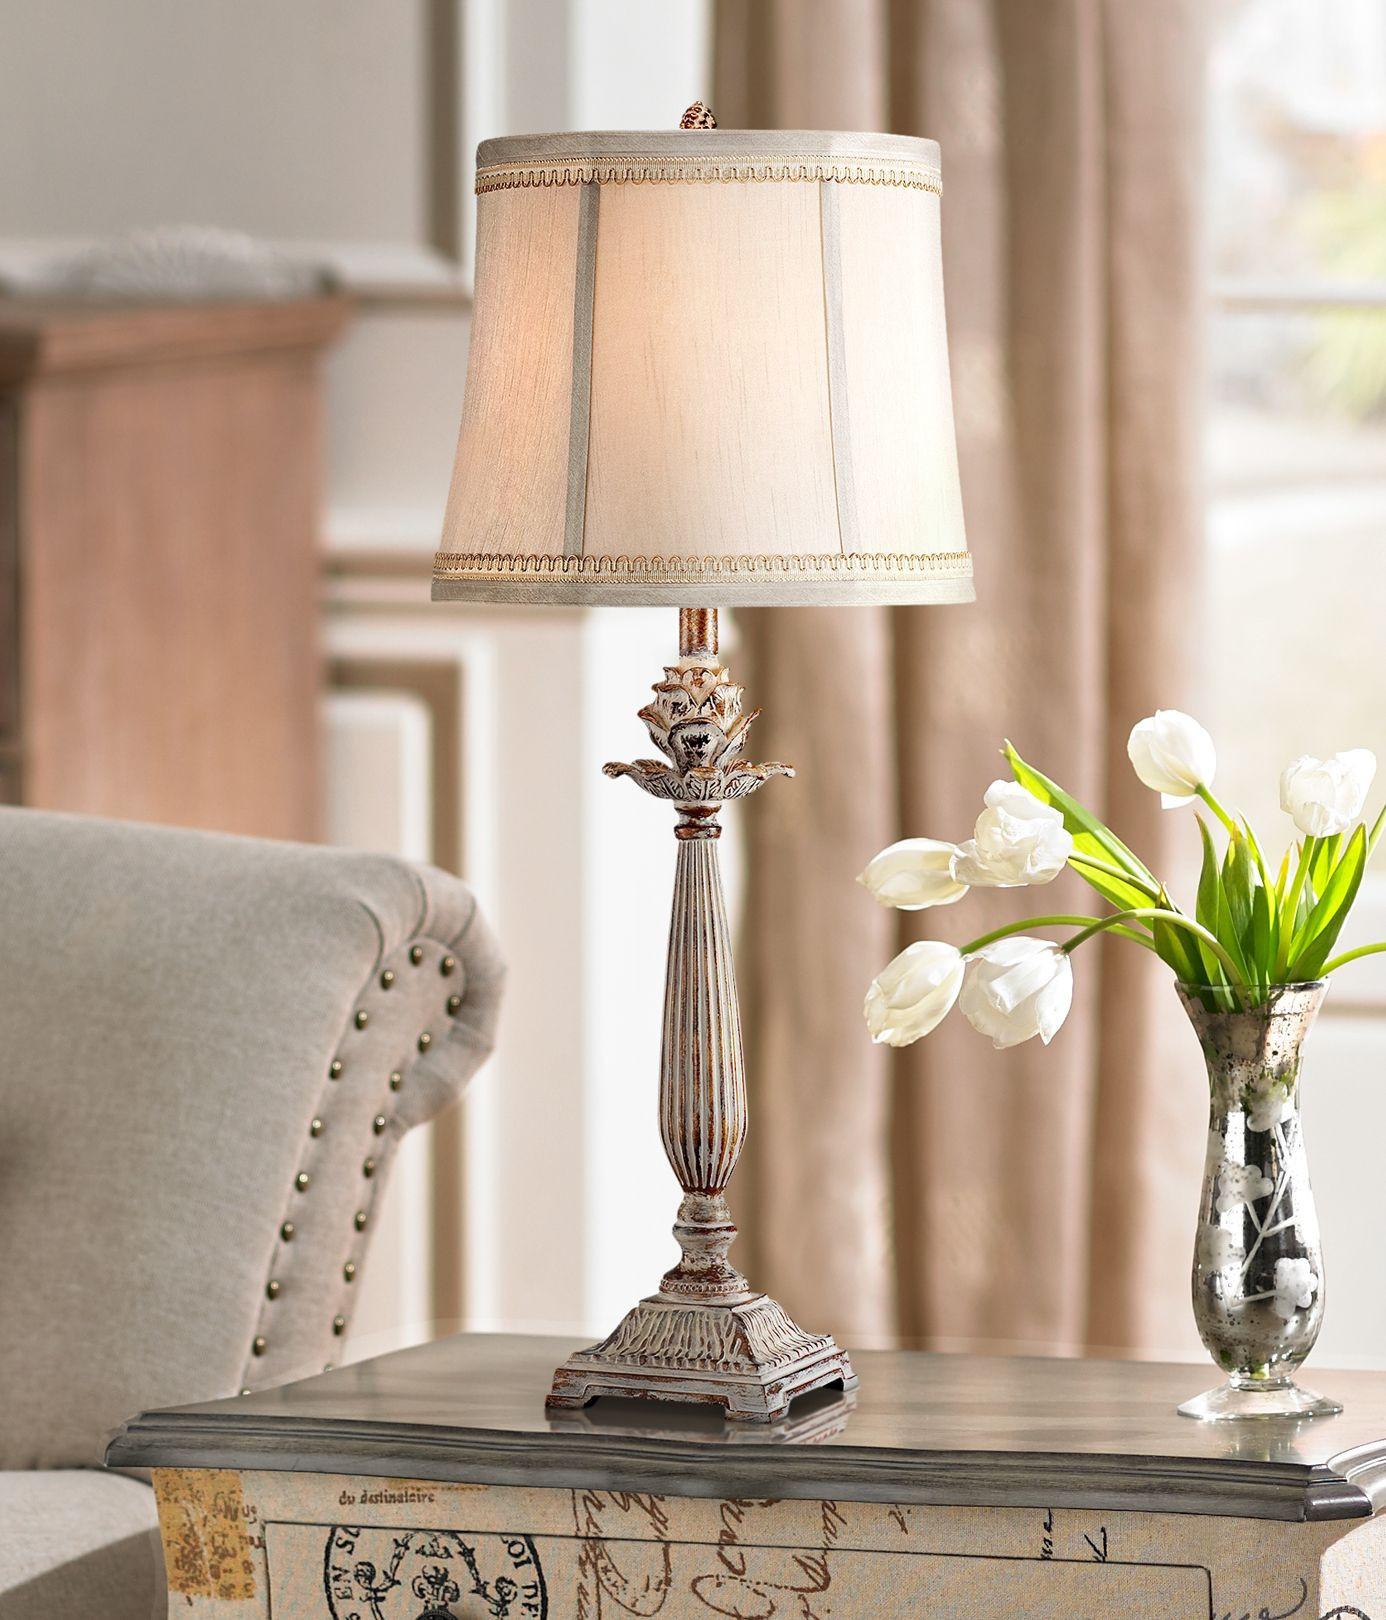 Shabby Chic Bedroom Lamp
 Regency Hill Shabby Chic Table Lamp Antique White Washed